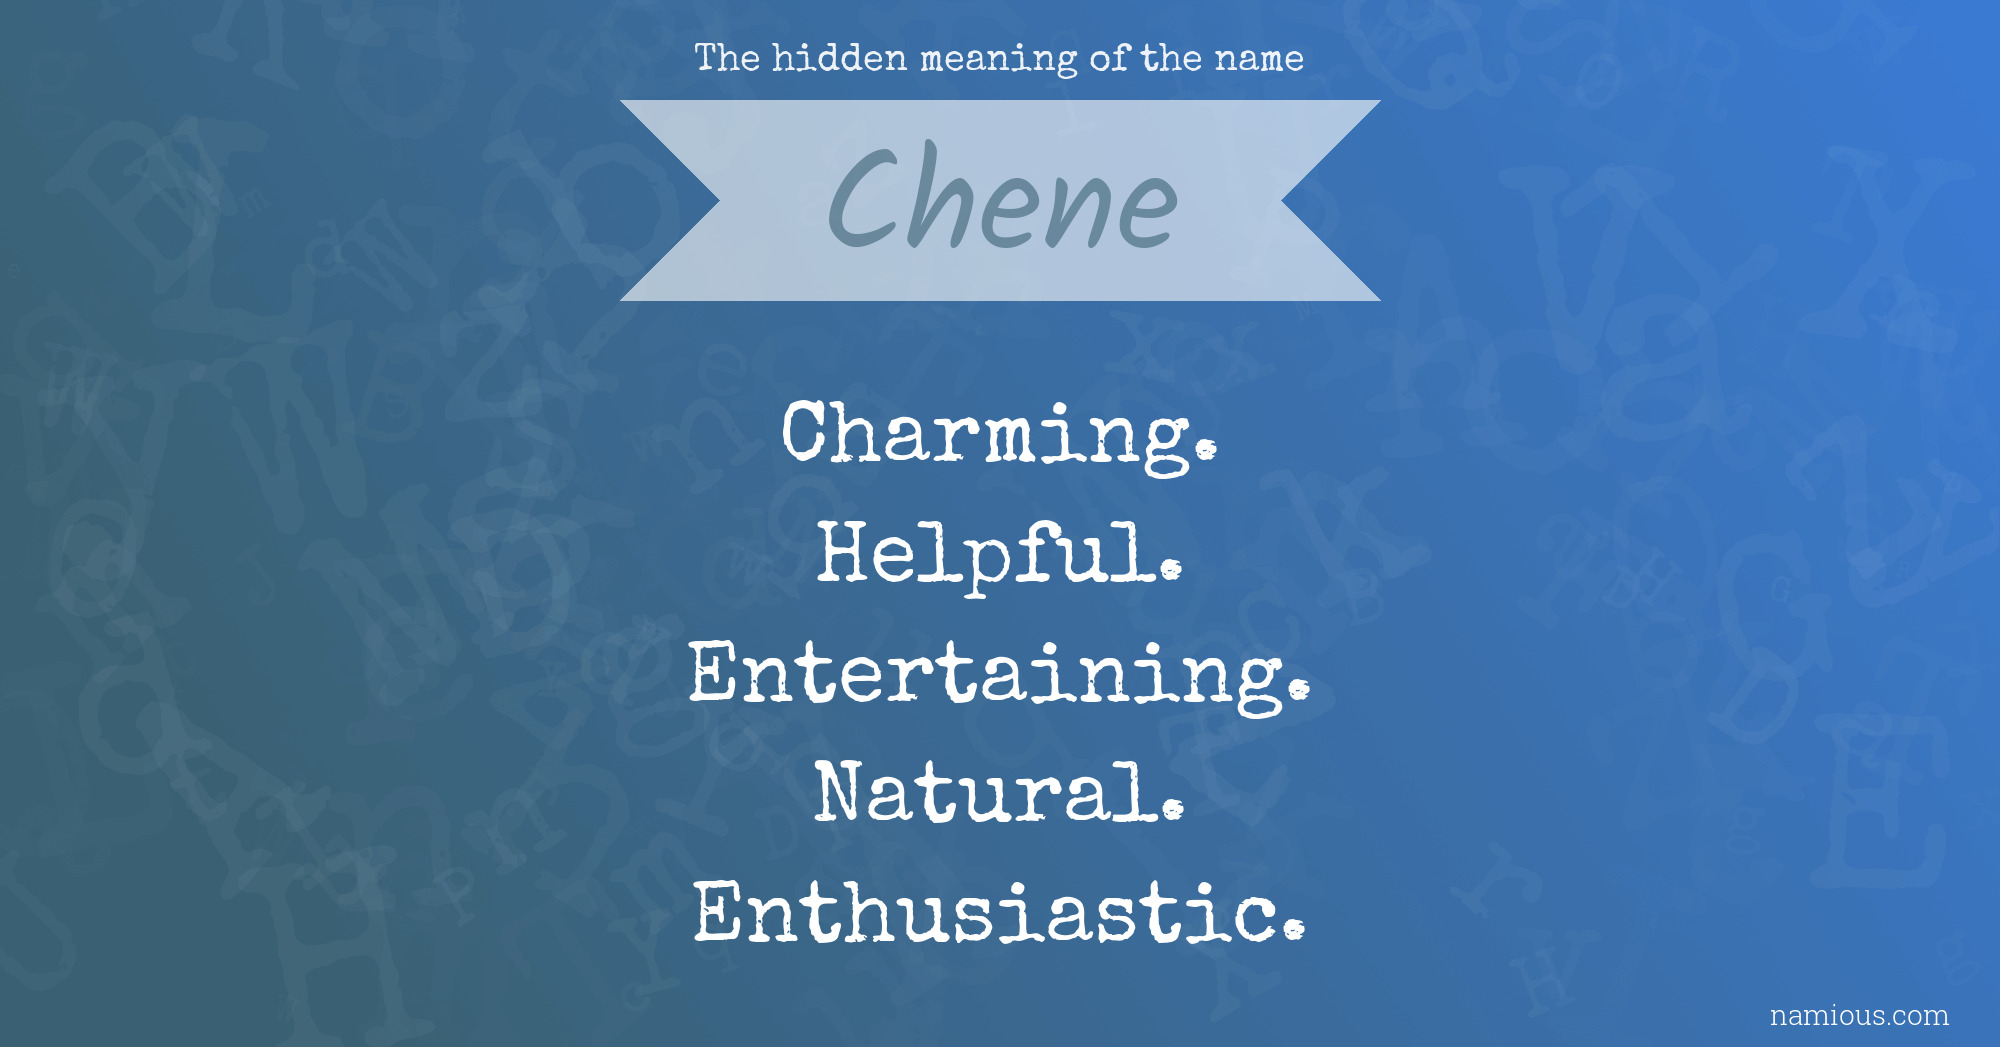 The hidden meaning of the name Chene